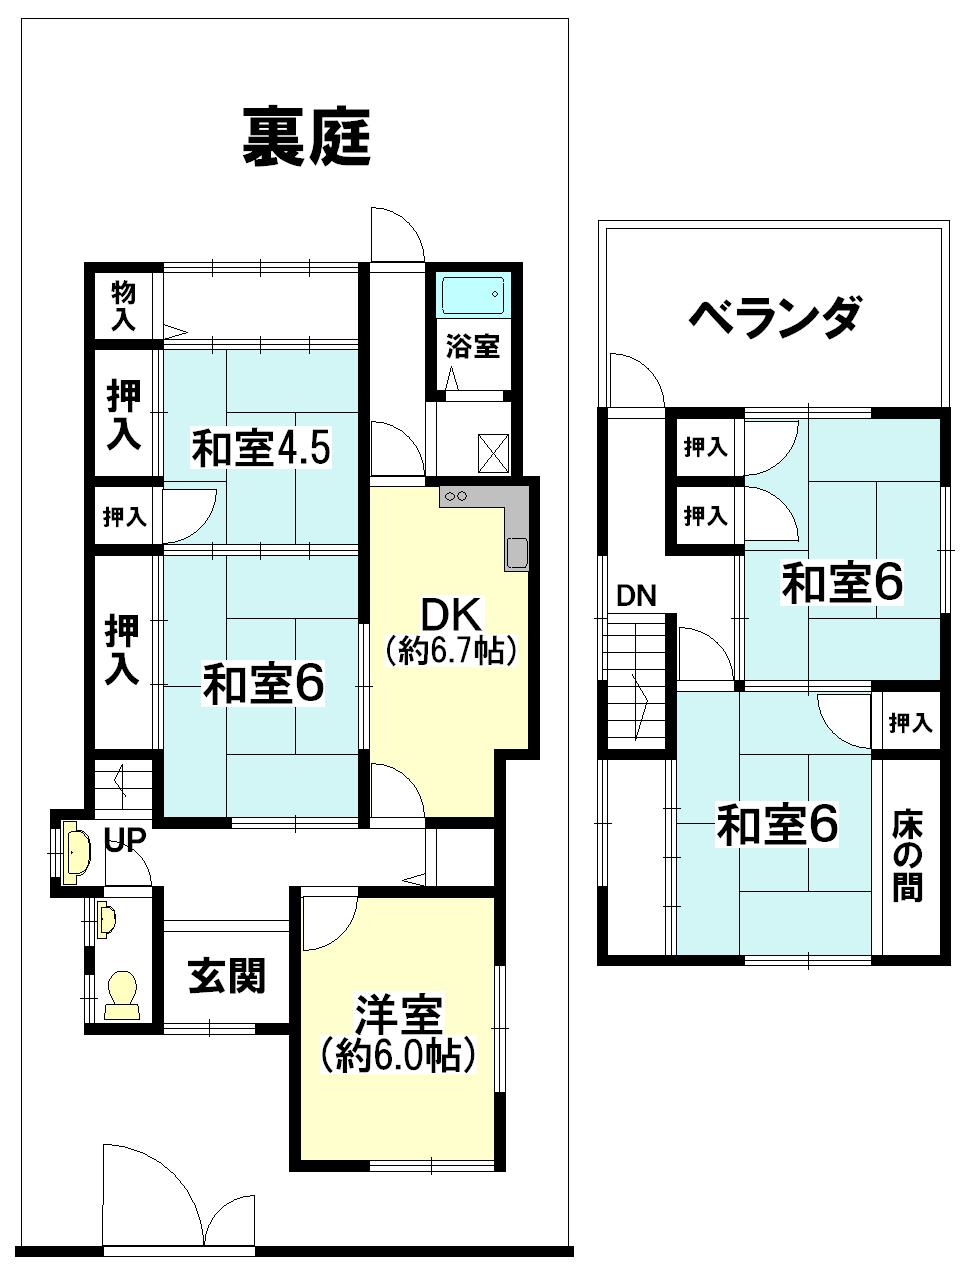 Floor plan. 29,800,000 yen, 5DK, Land area 131.86 sq m , Building area 89.41 sq m   ■ 2011 in there completely renovated history